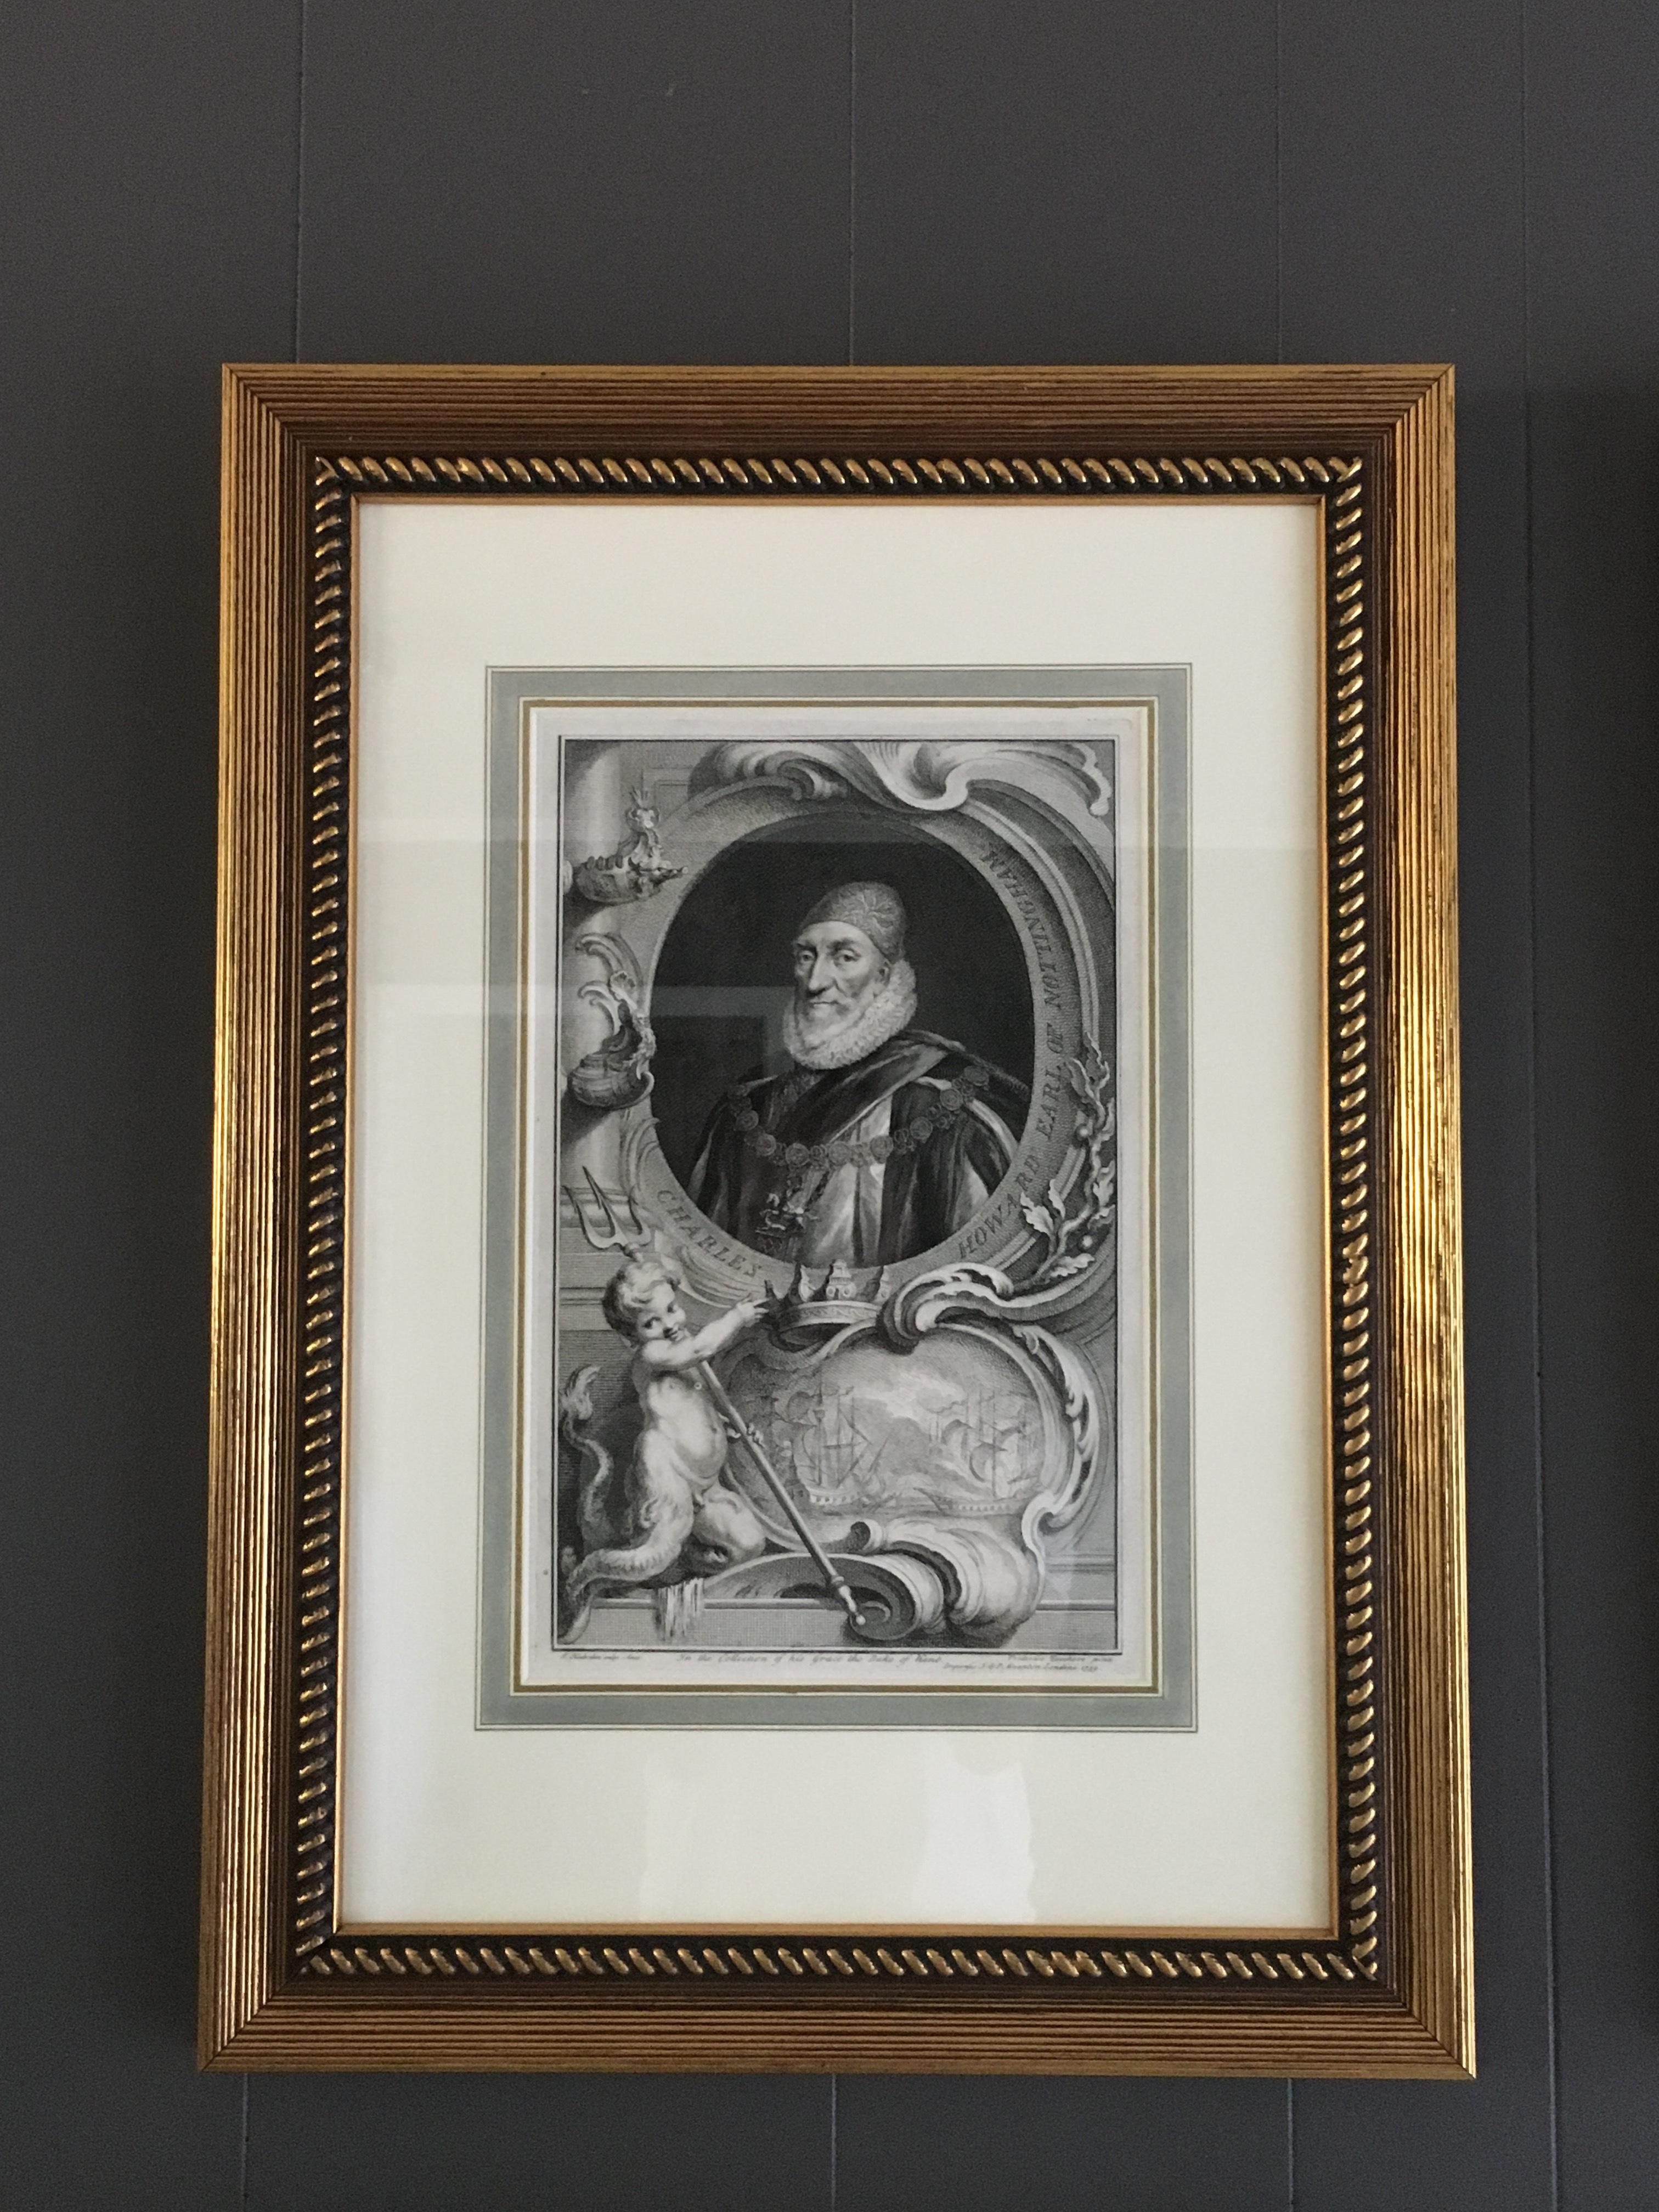 A lovely set of four 18th century style portrait engravings with allegorical scenes presented in giltwood frames under glass with very fine hand-colored matting. The engravings were done by George Vertue and published by J & P Knapton, and in the